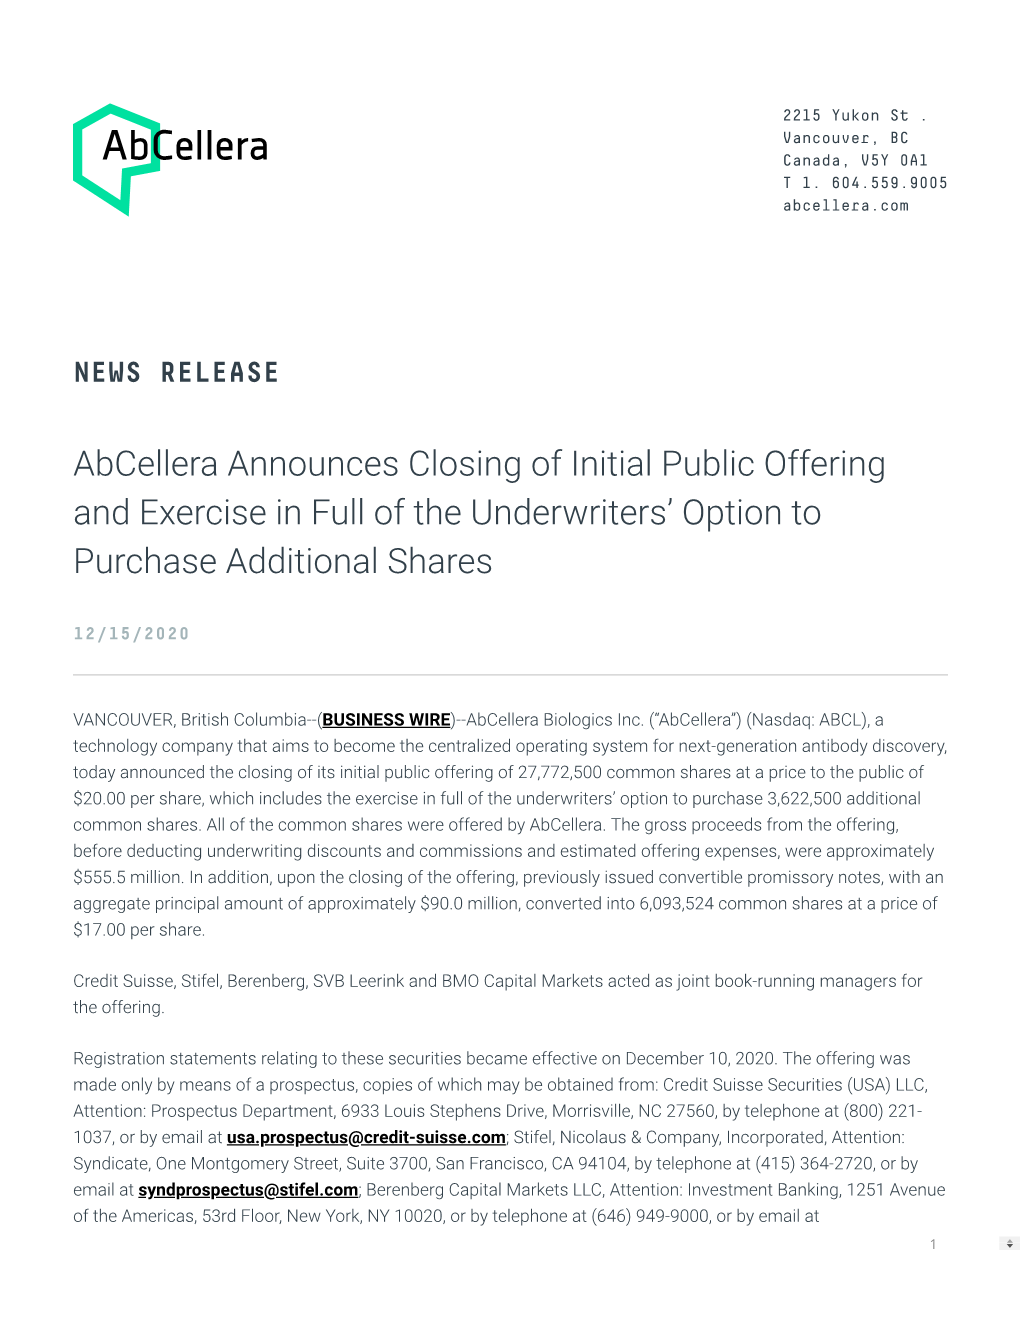 Abcellera Announces Closing of Initial Public Offering and Exercise in Full of the Underwriters' Option to Purchase Additional